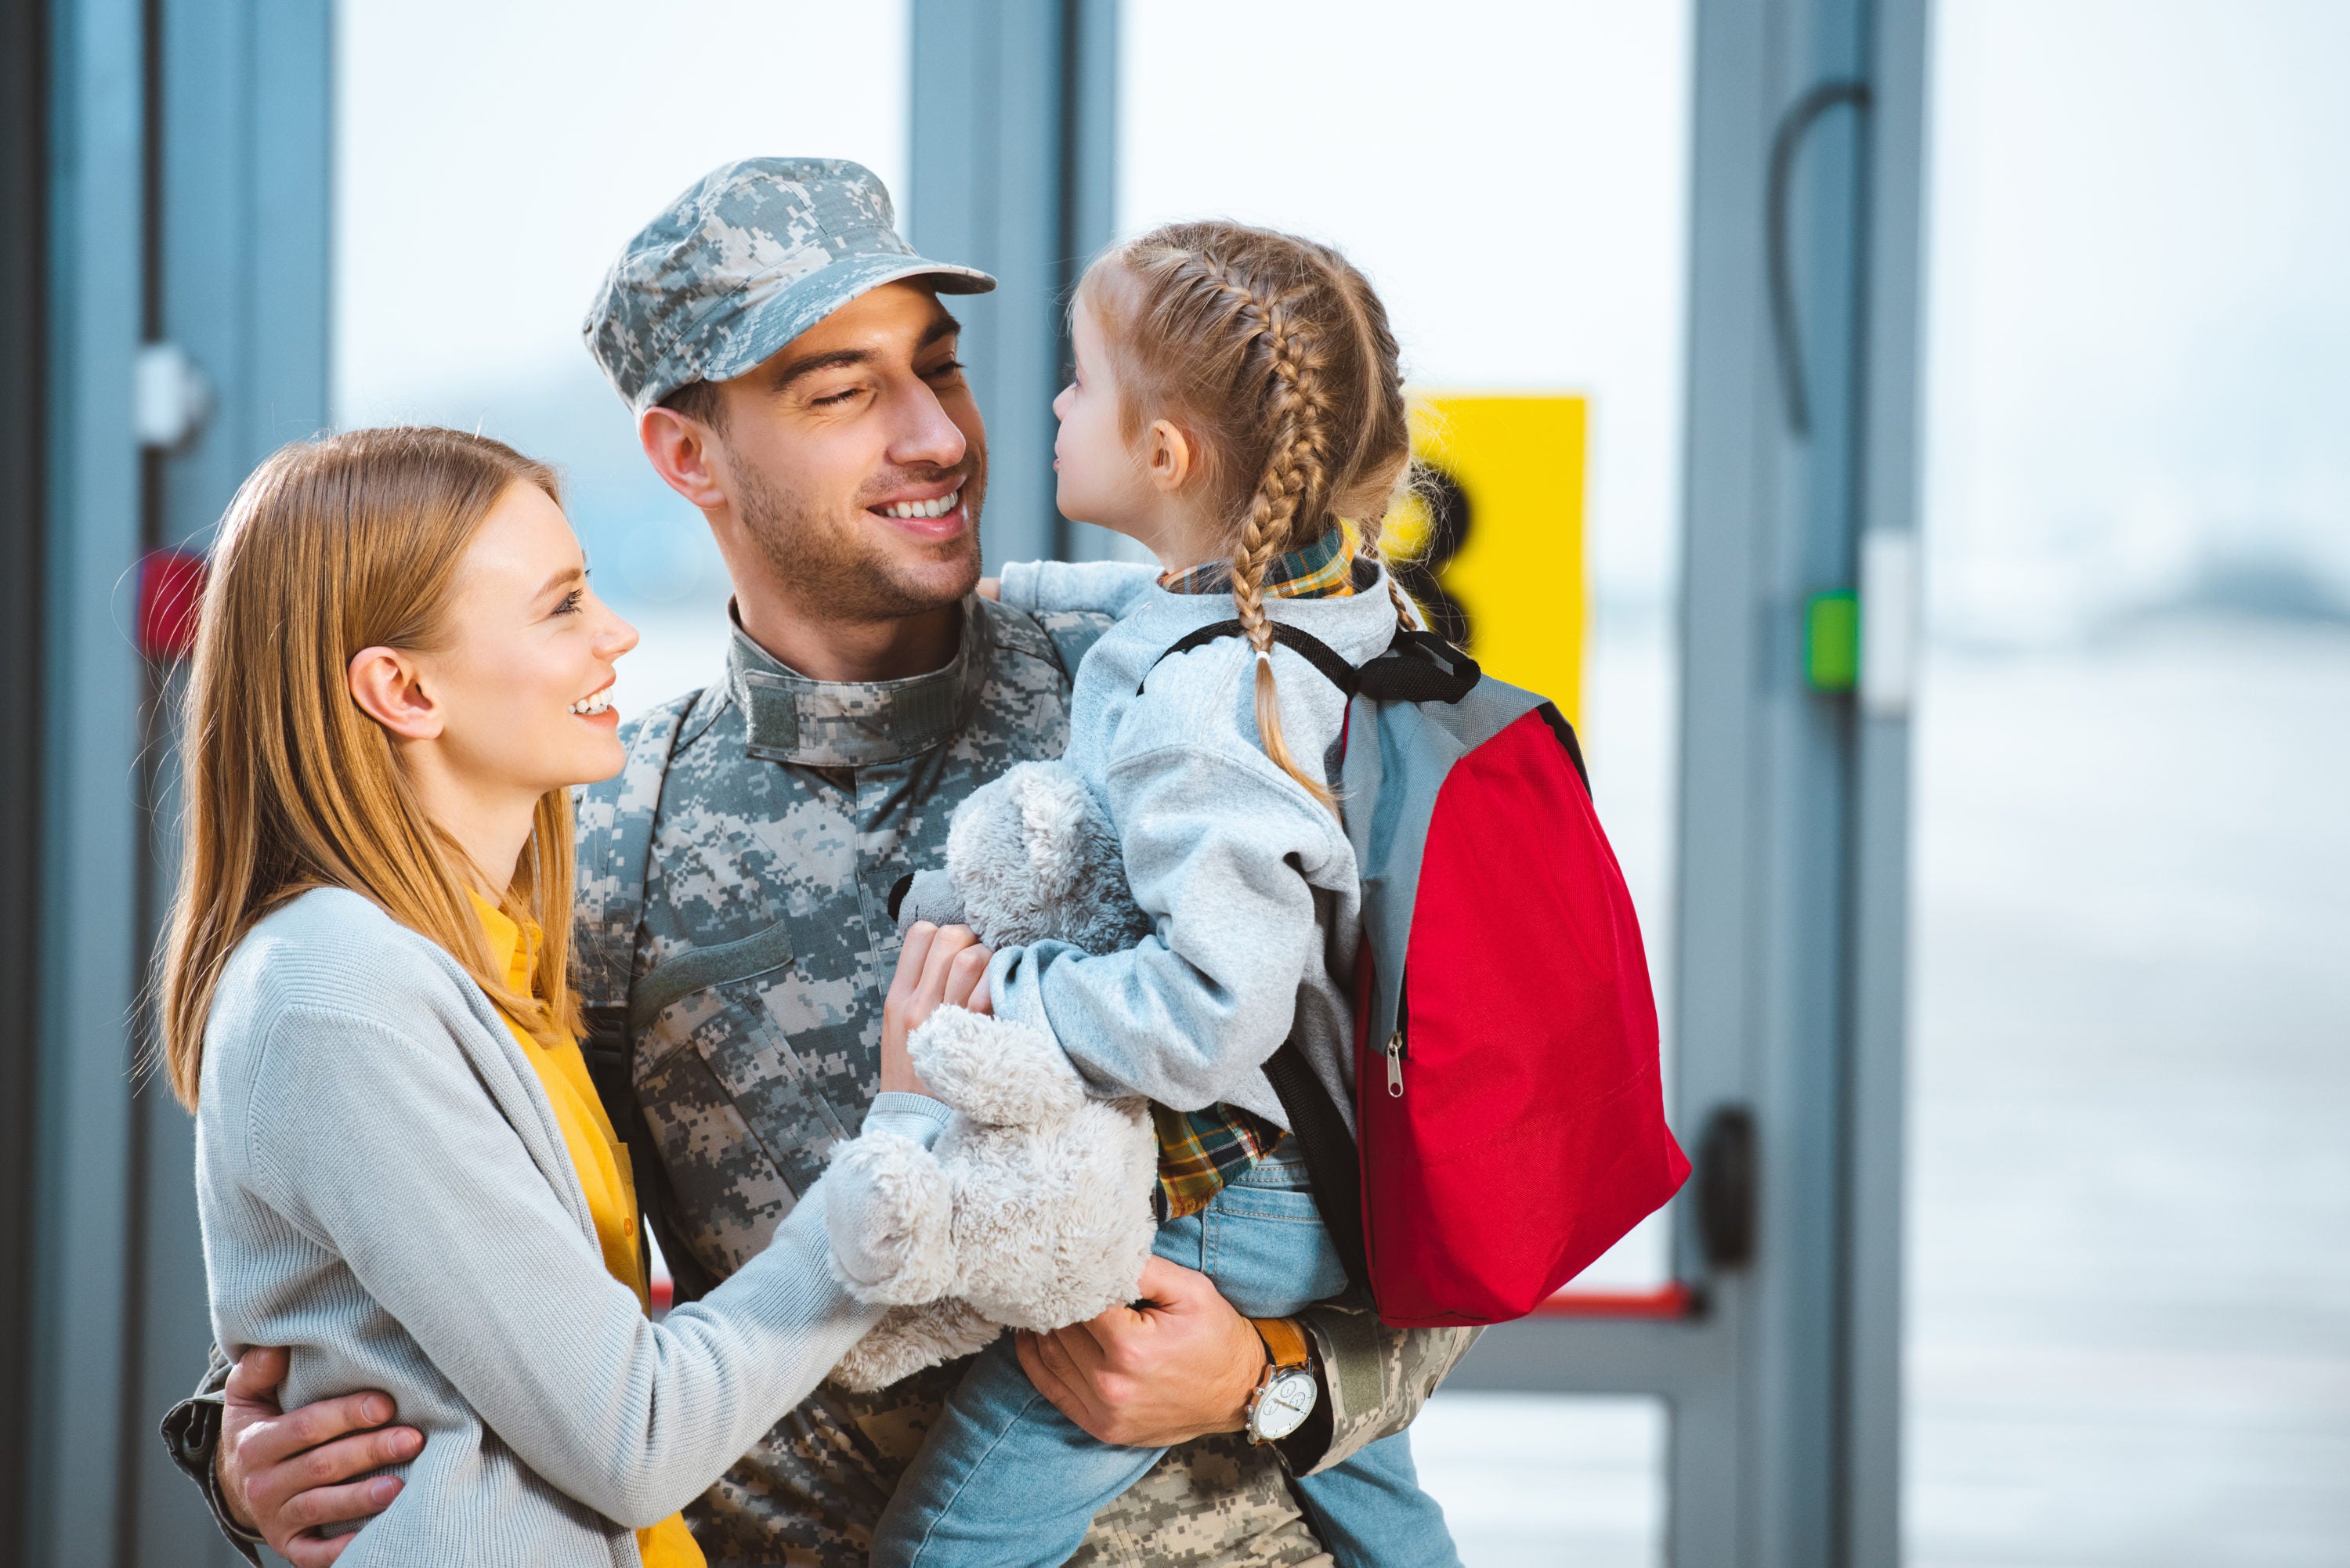 Smiling father in military uniform holding in arms daughter near wife in airport